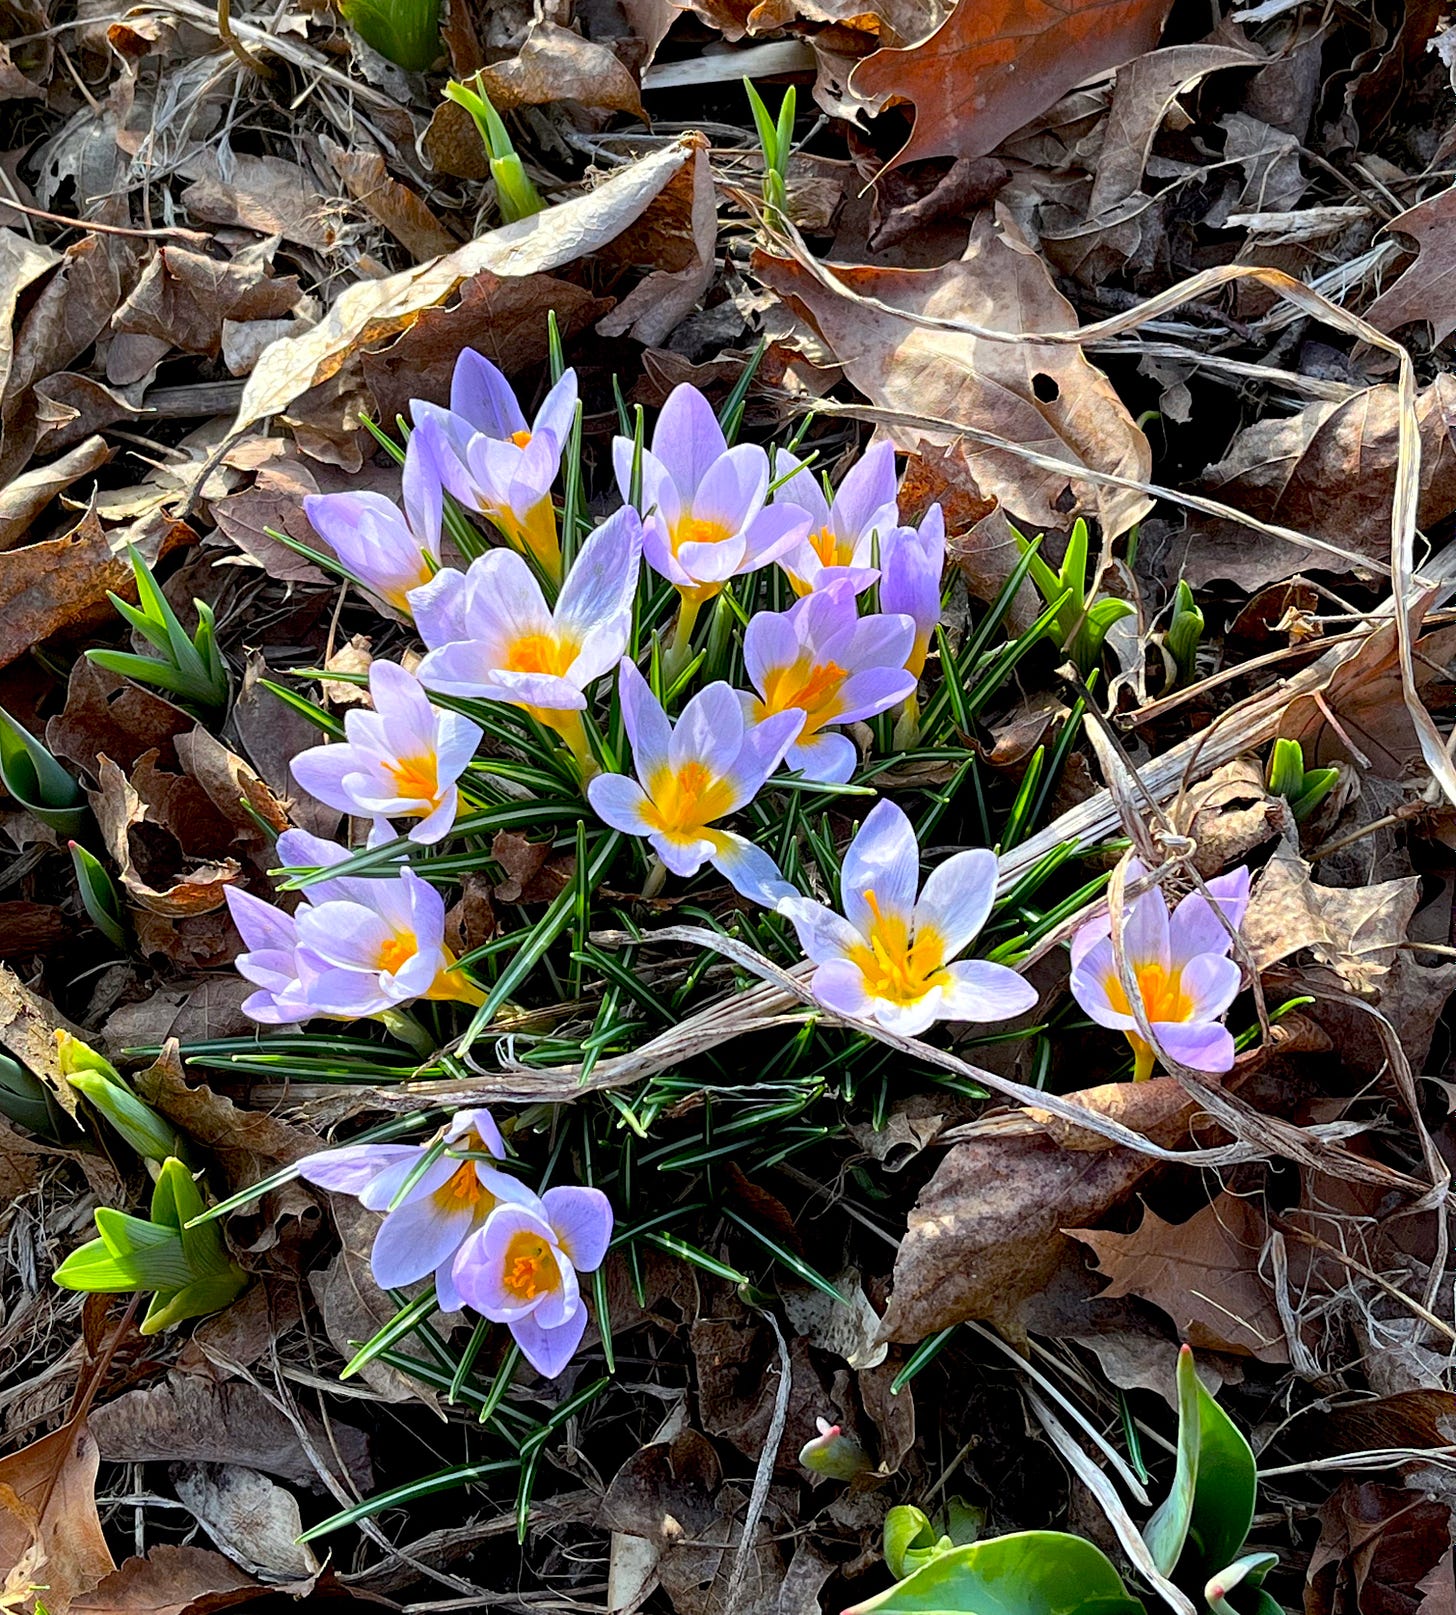 Purple crocuses with orange centers, growing out of a bed of brown fallen leaves